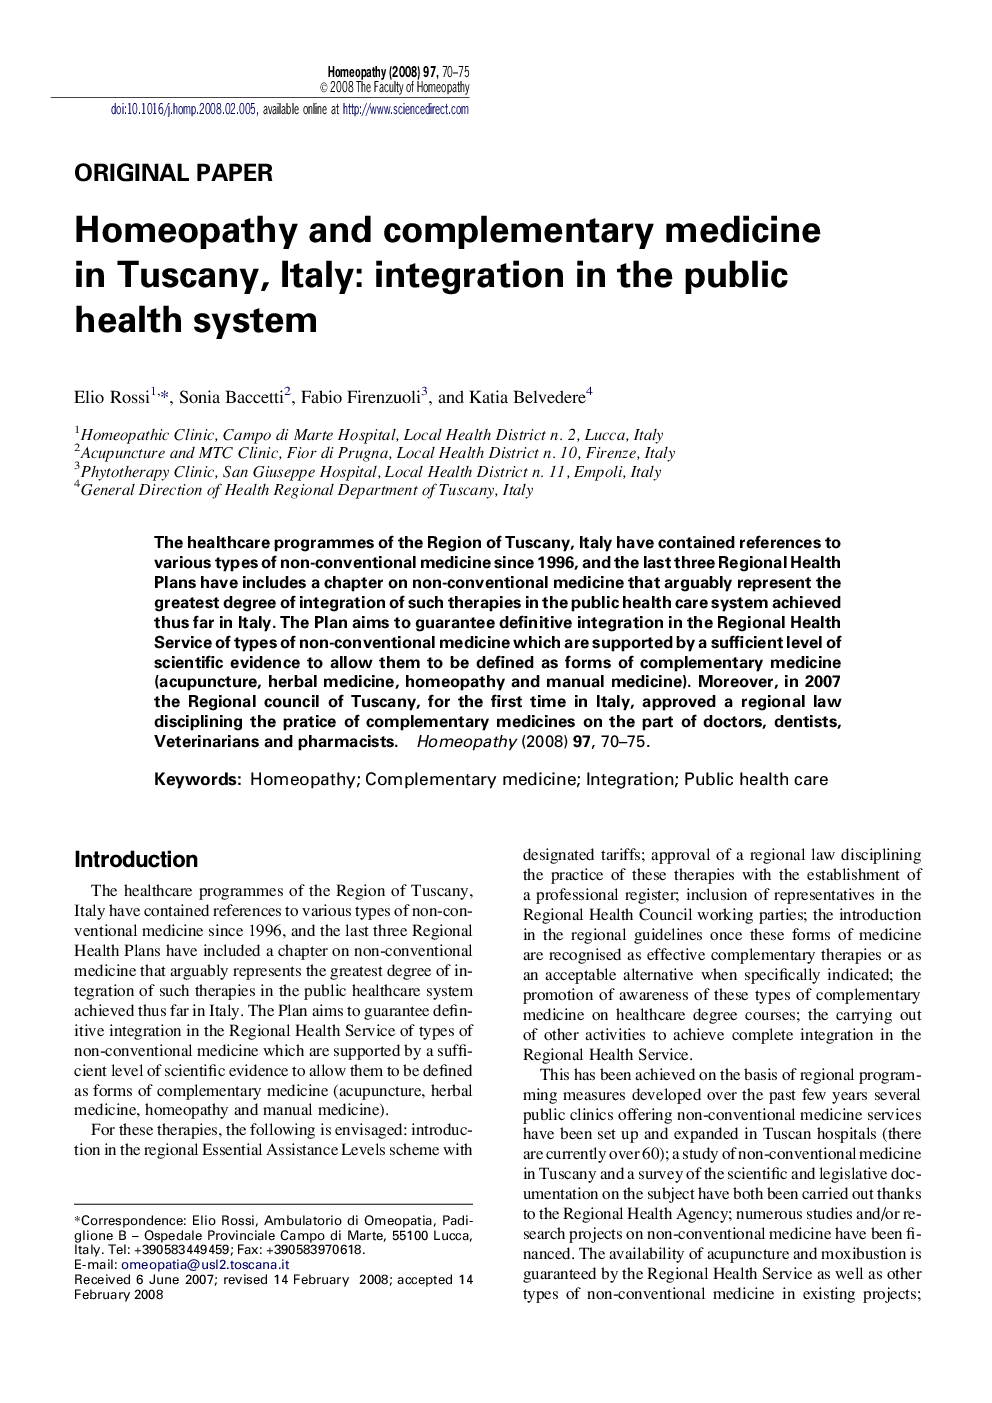 Homeopathy and complementary medicine in Tuscany, Italy: integration in the public health system